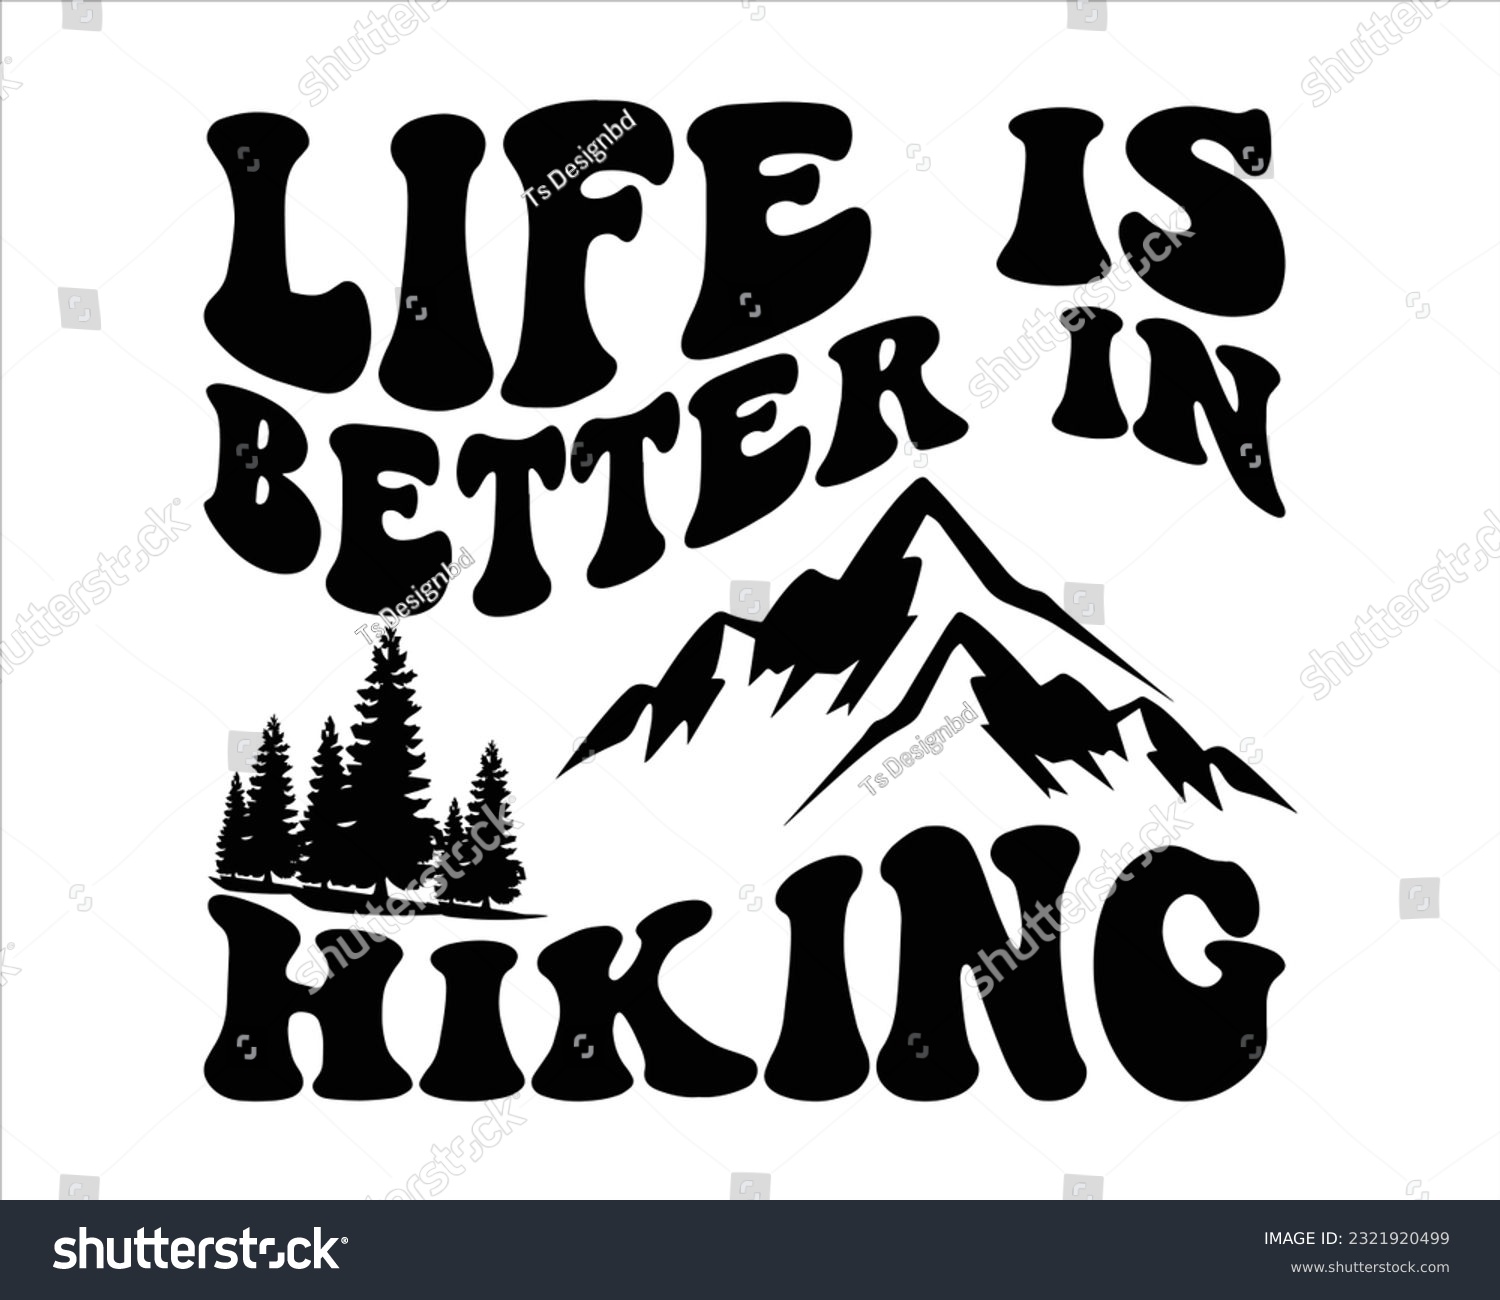 SVG of Life Is Better In Hiking  Retro Svg Design,Hiking Retro Svg Design, Mountain illustration, outdoor adventure ,Outdoor Adventure Inspiring Motivation Quote, camping,groovy design svg